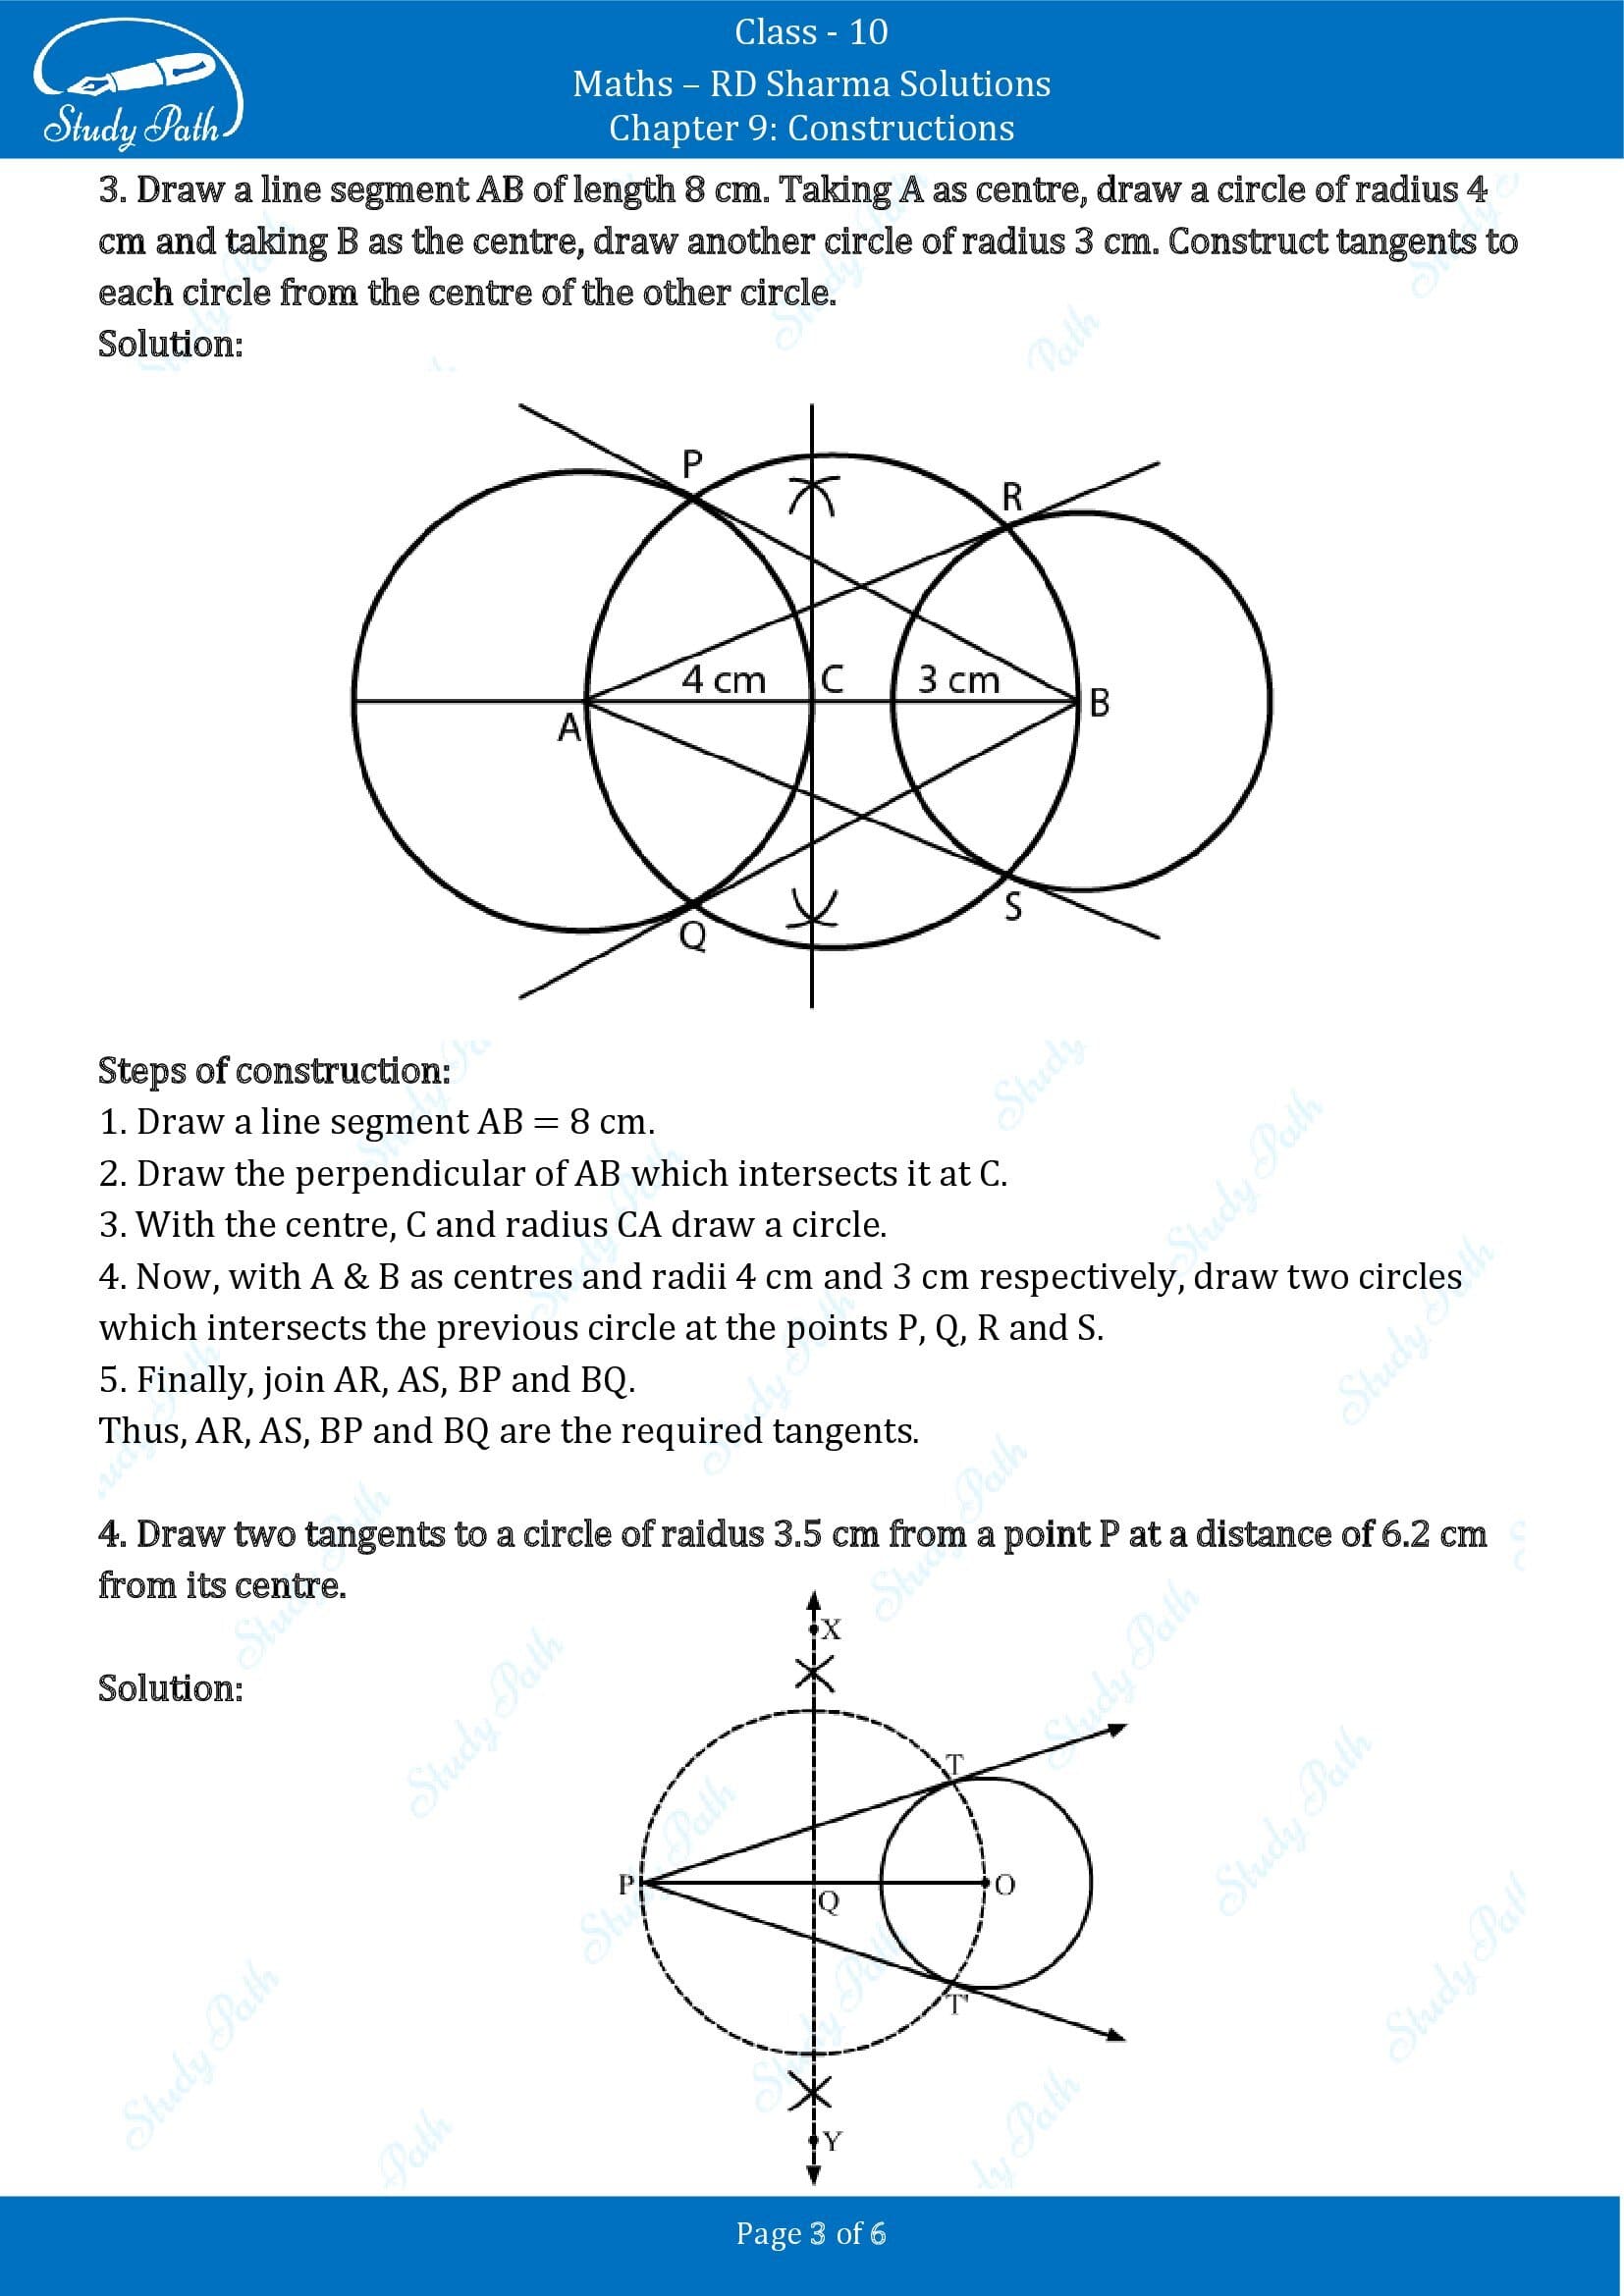 RD Sharma Solutions Class 10 Chapter 9 Constructions Exercise 9.3 00003